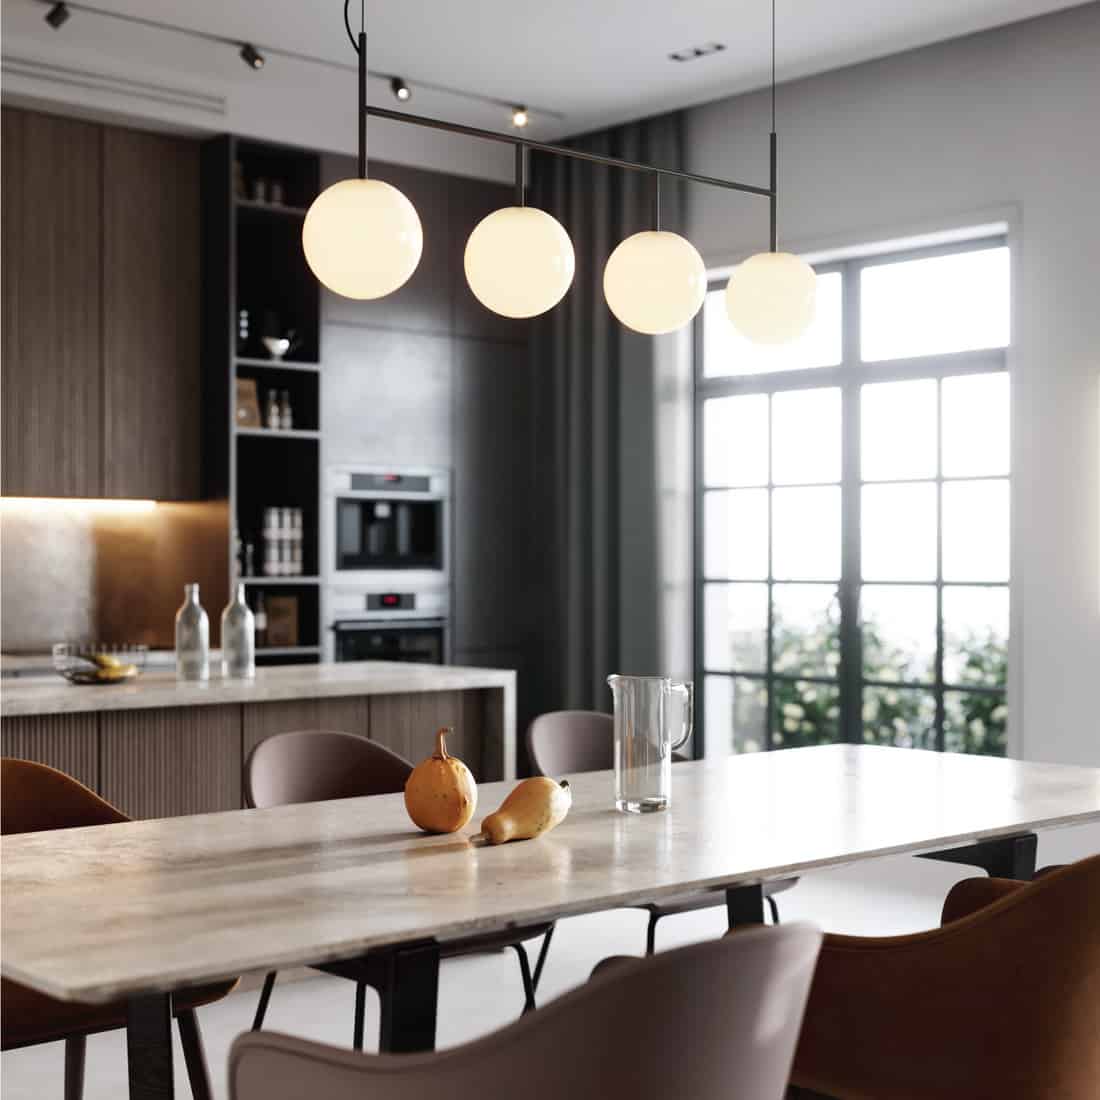 Sleek Kitchen With Warm Colors. globe lights hanging above the dining table